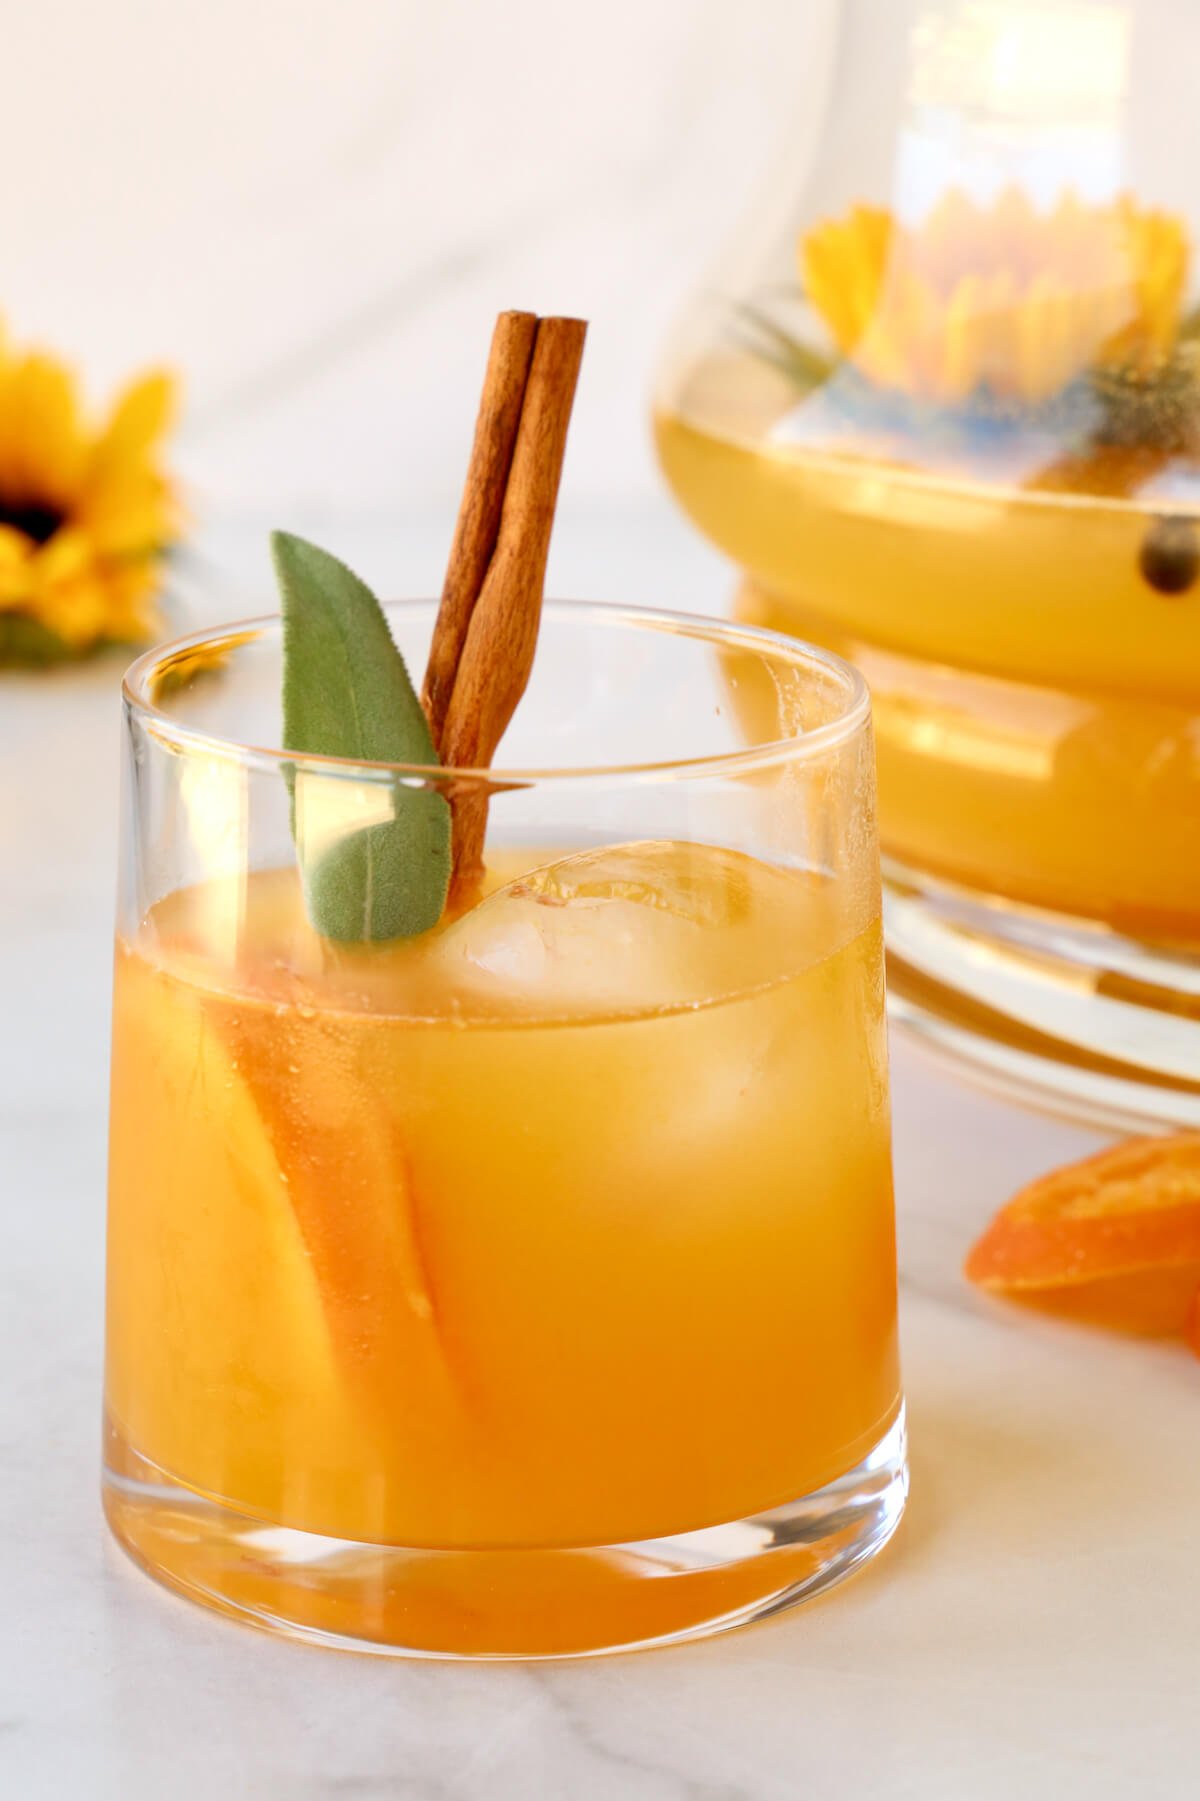 A clear glass filled with an orange liquid, orange slices, cinnamon stick and sage. 